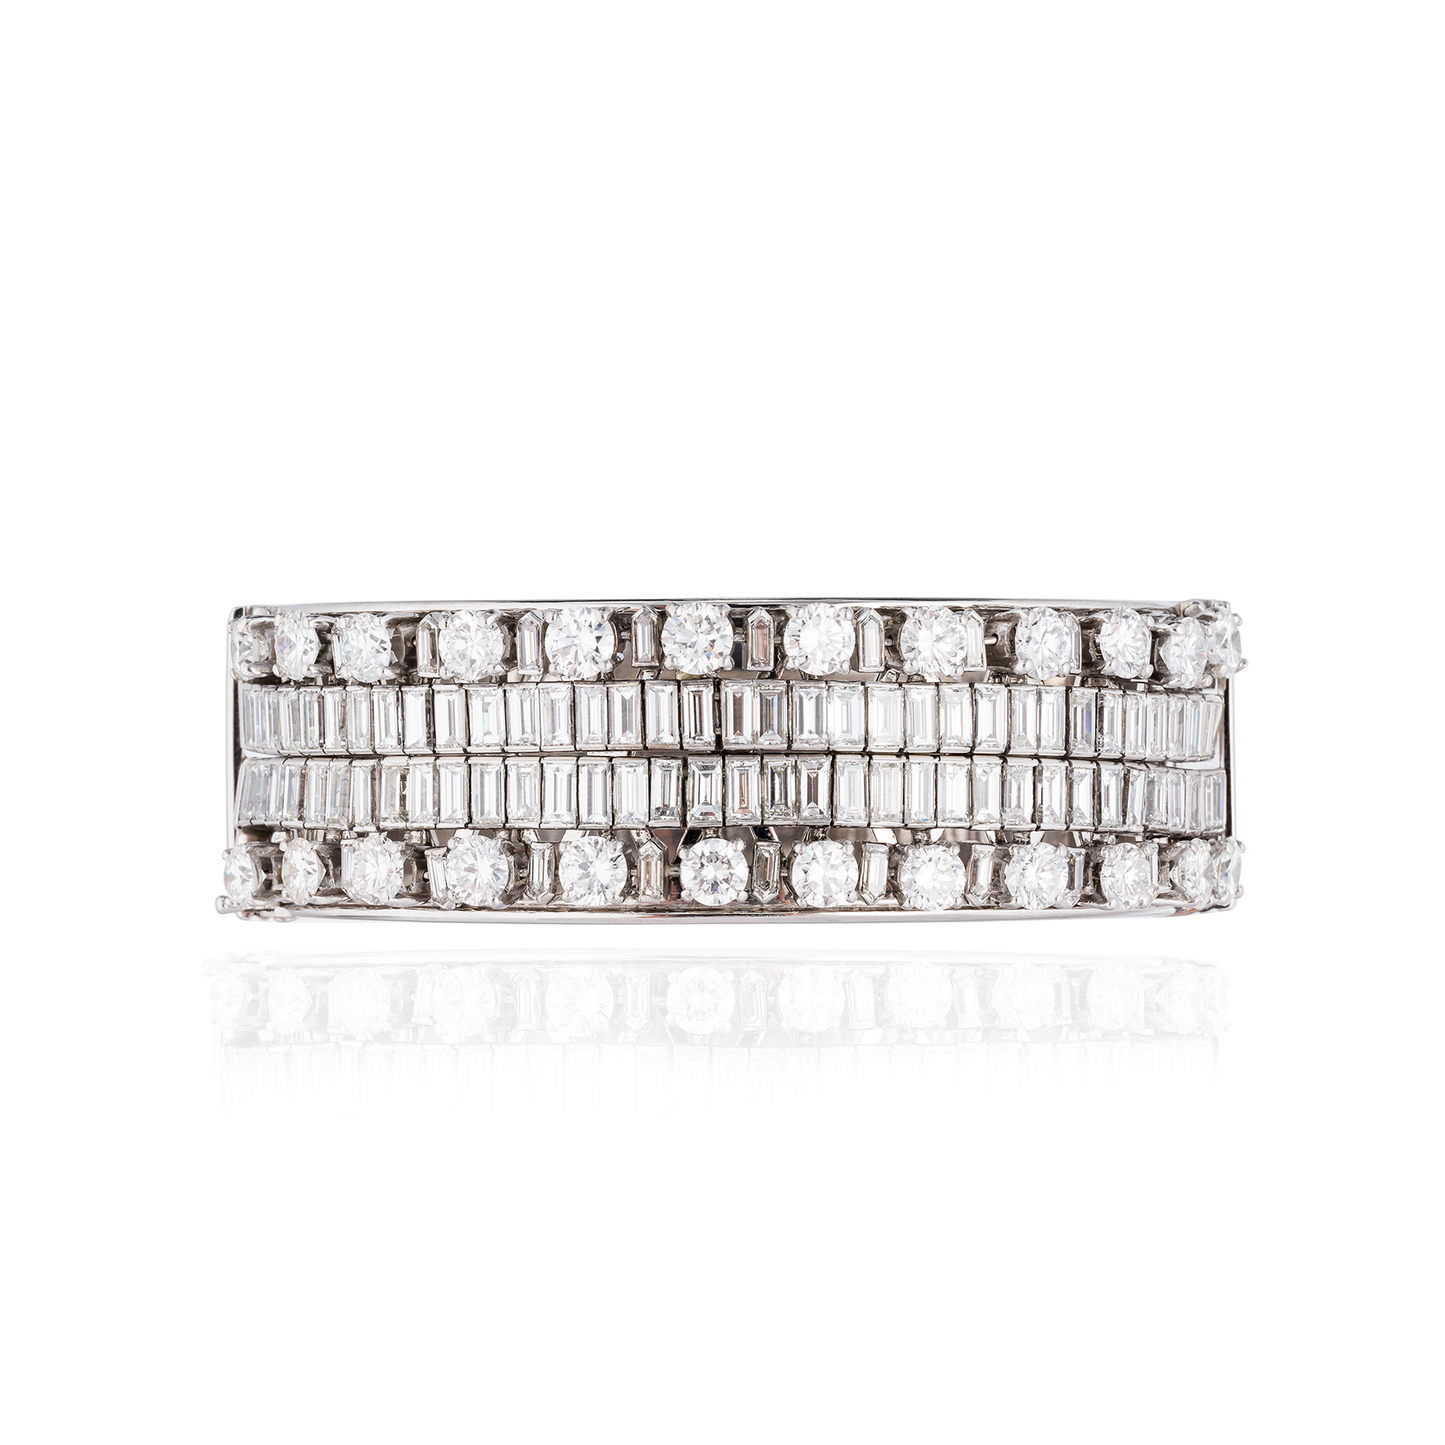 Load image into Gallery viewer, 18K White Gold Bracelet with White Diamonds
